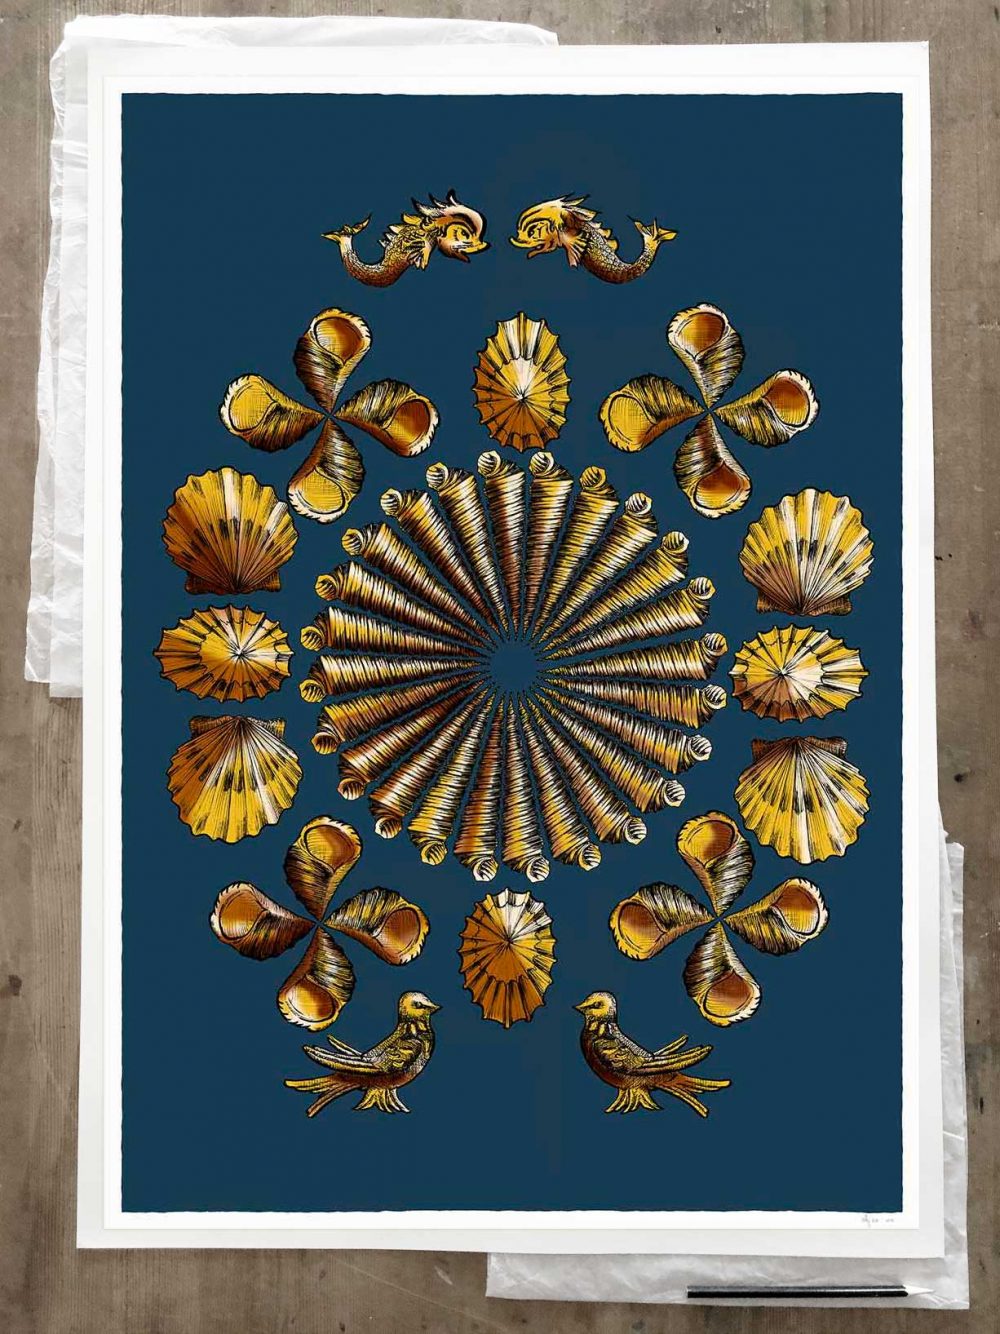 Fine art print by artist alej ez titled Shell Grotto Blue and Gold